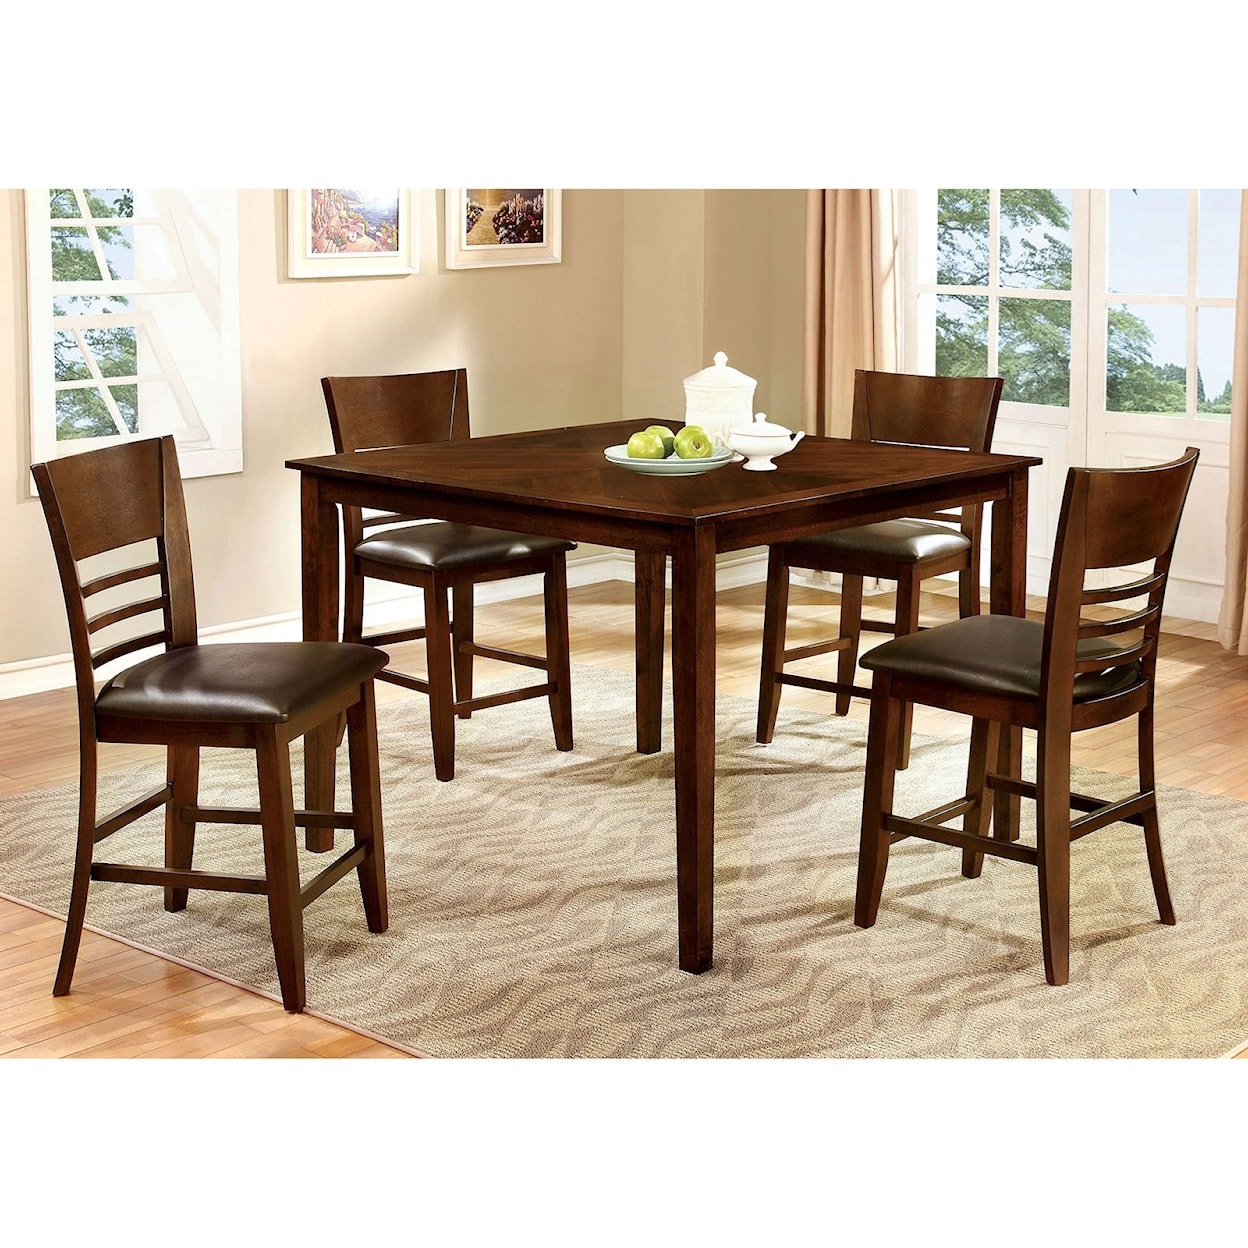 Furniture of America Hillsview Counter Height Table Set